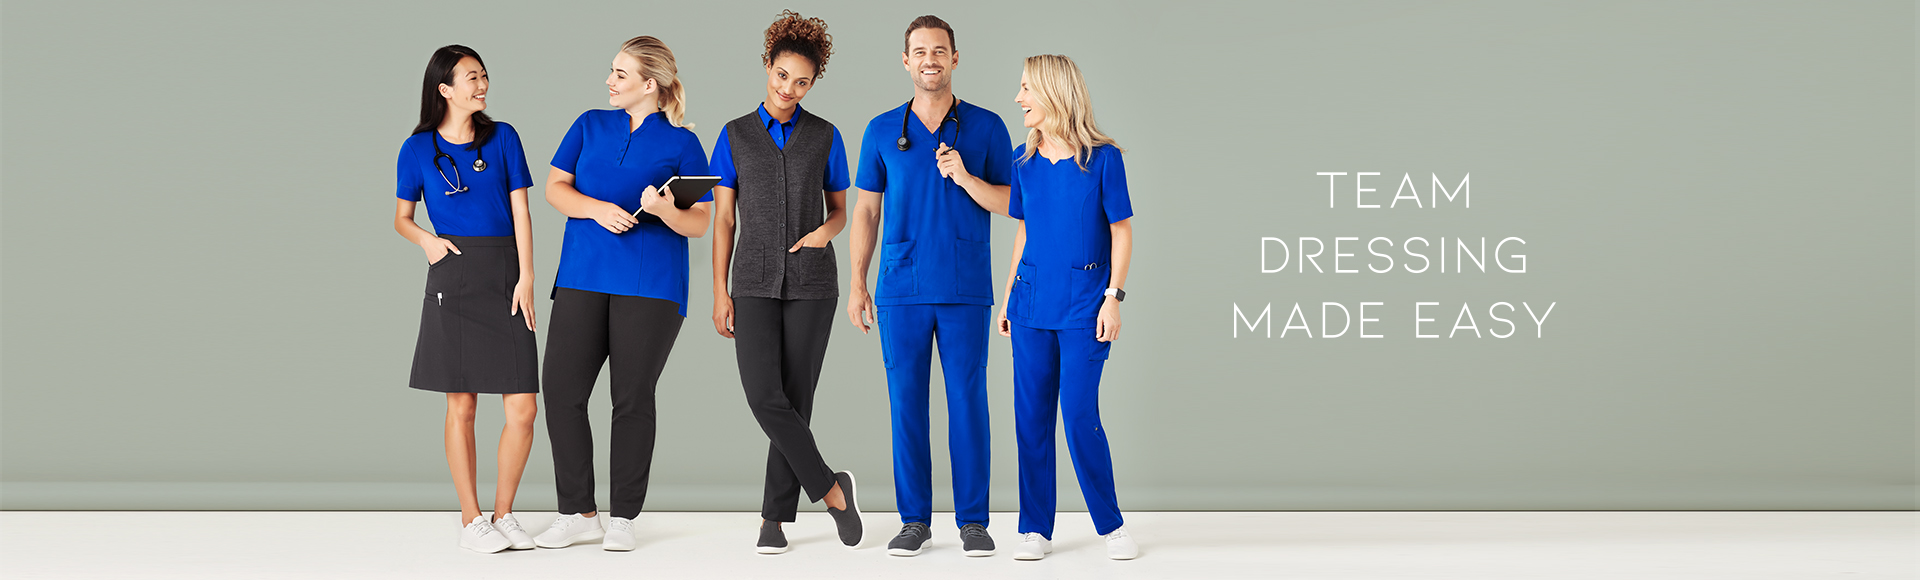 Workwear Express - Workwear and Uniforms Central Coast, Promotional Items,  Corporate Gifts and Uniform Solutions 